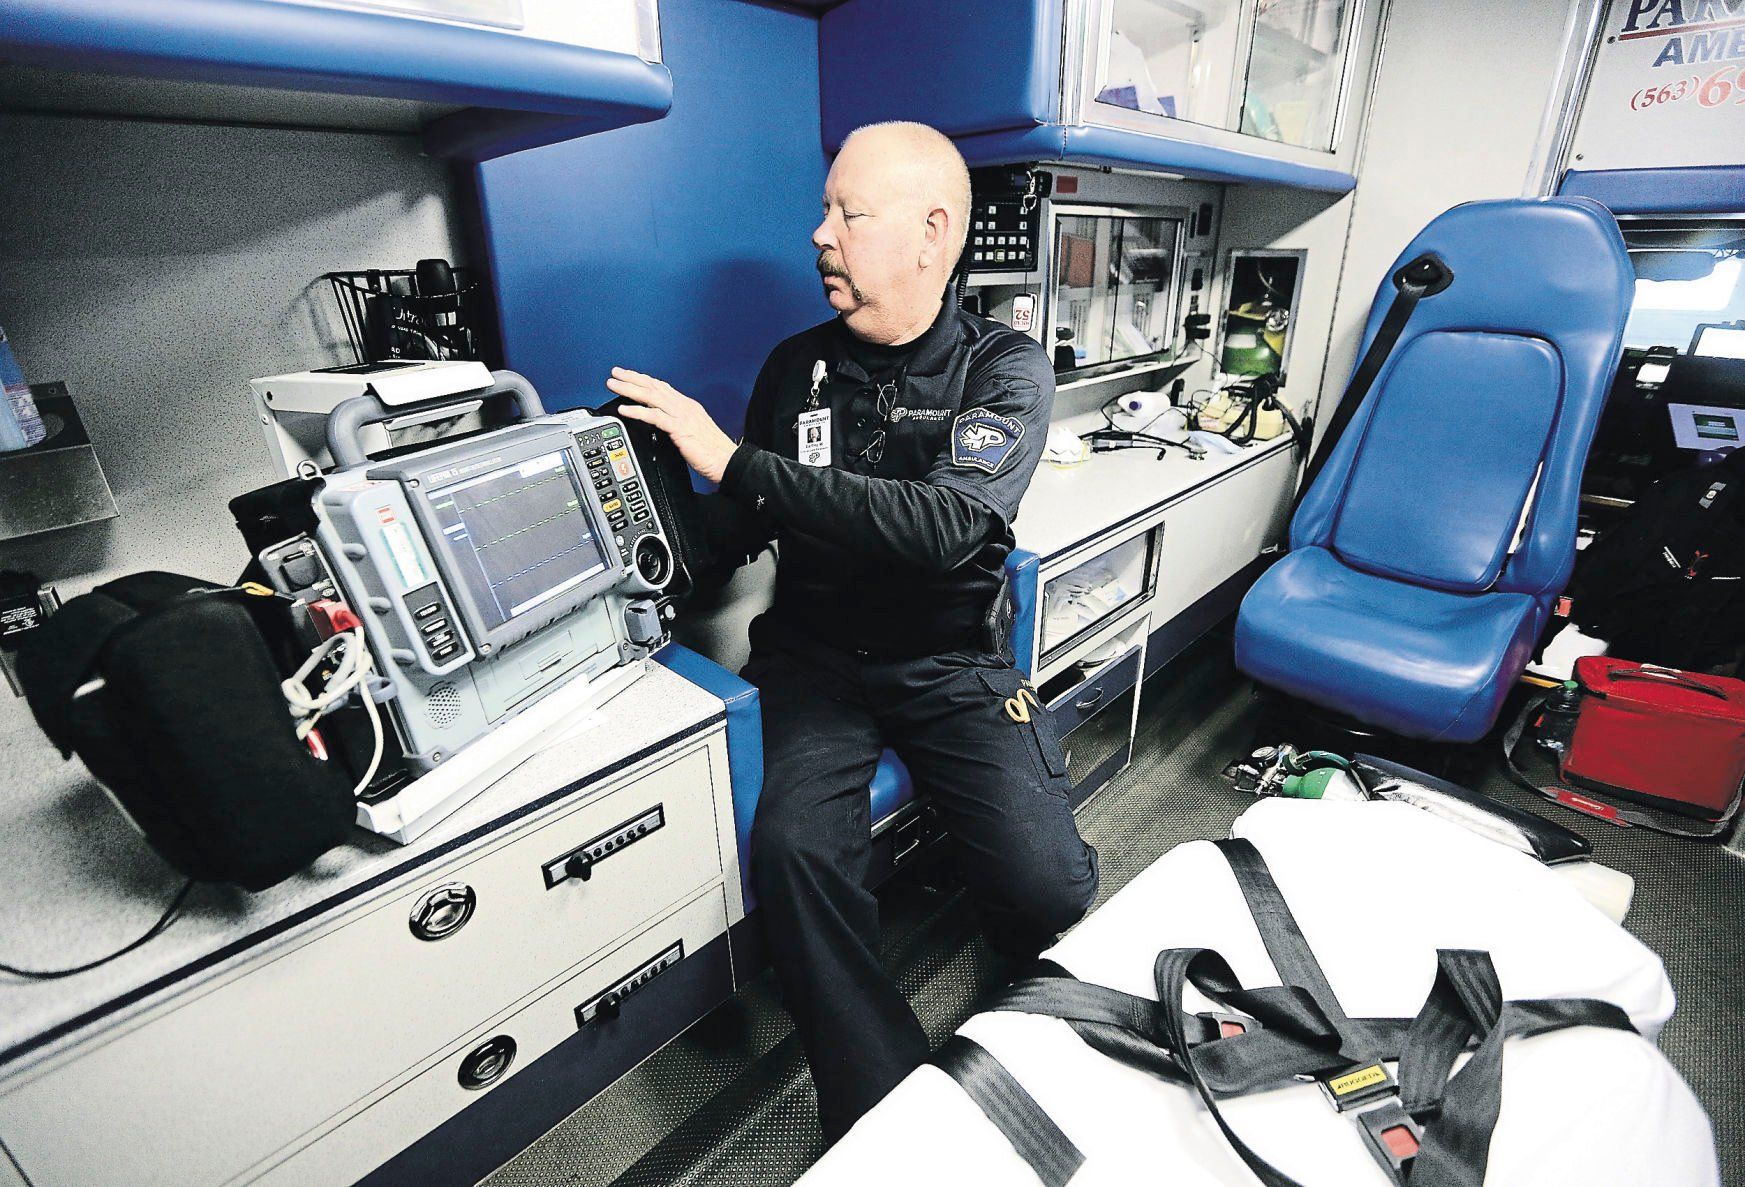 Paramount Ambulance employee Bartley Welch checks equipment inside one of the ambulances.    PHOTO CREDIT: Dave Kettering